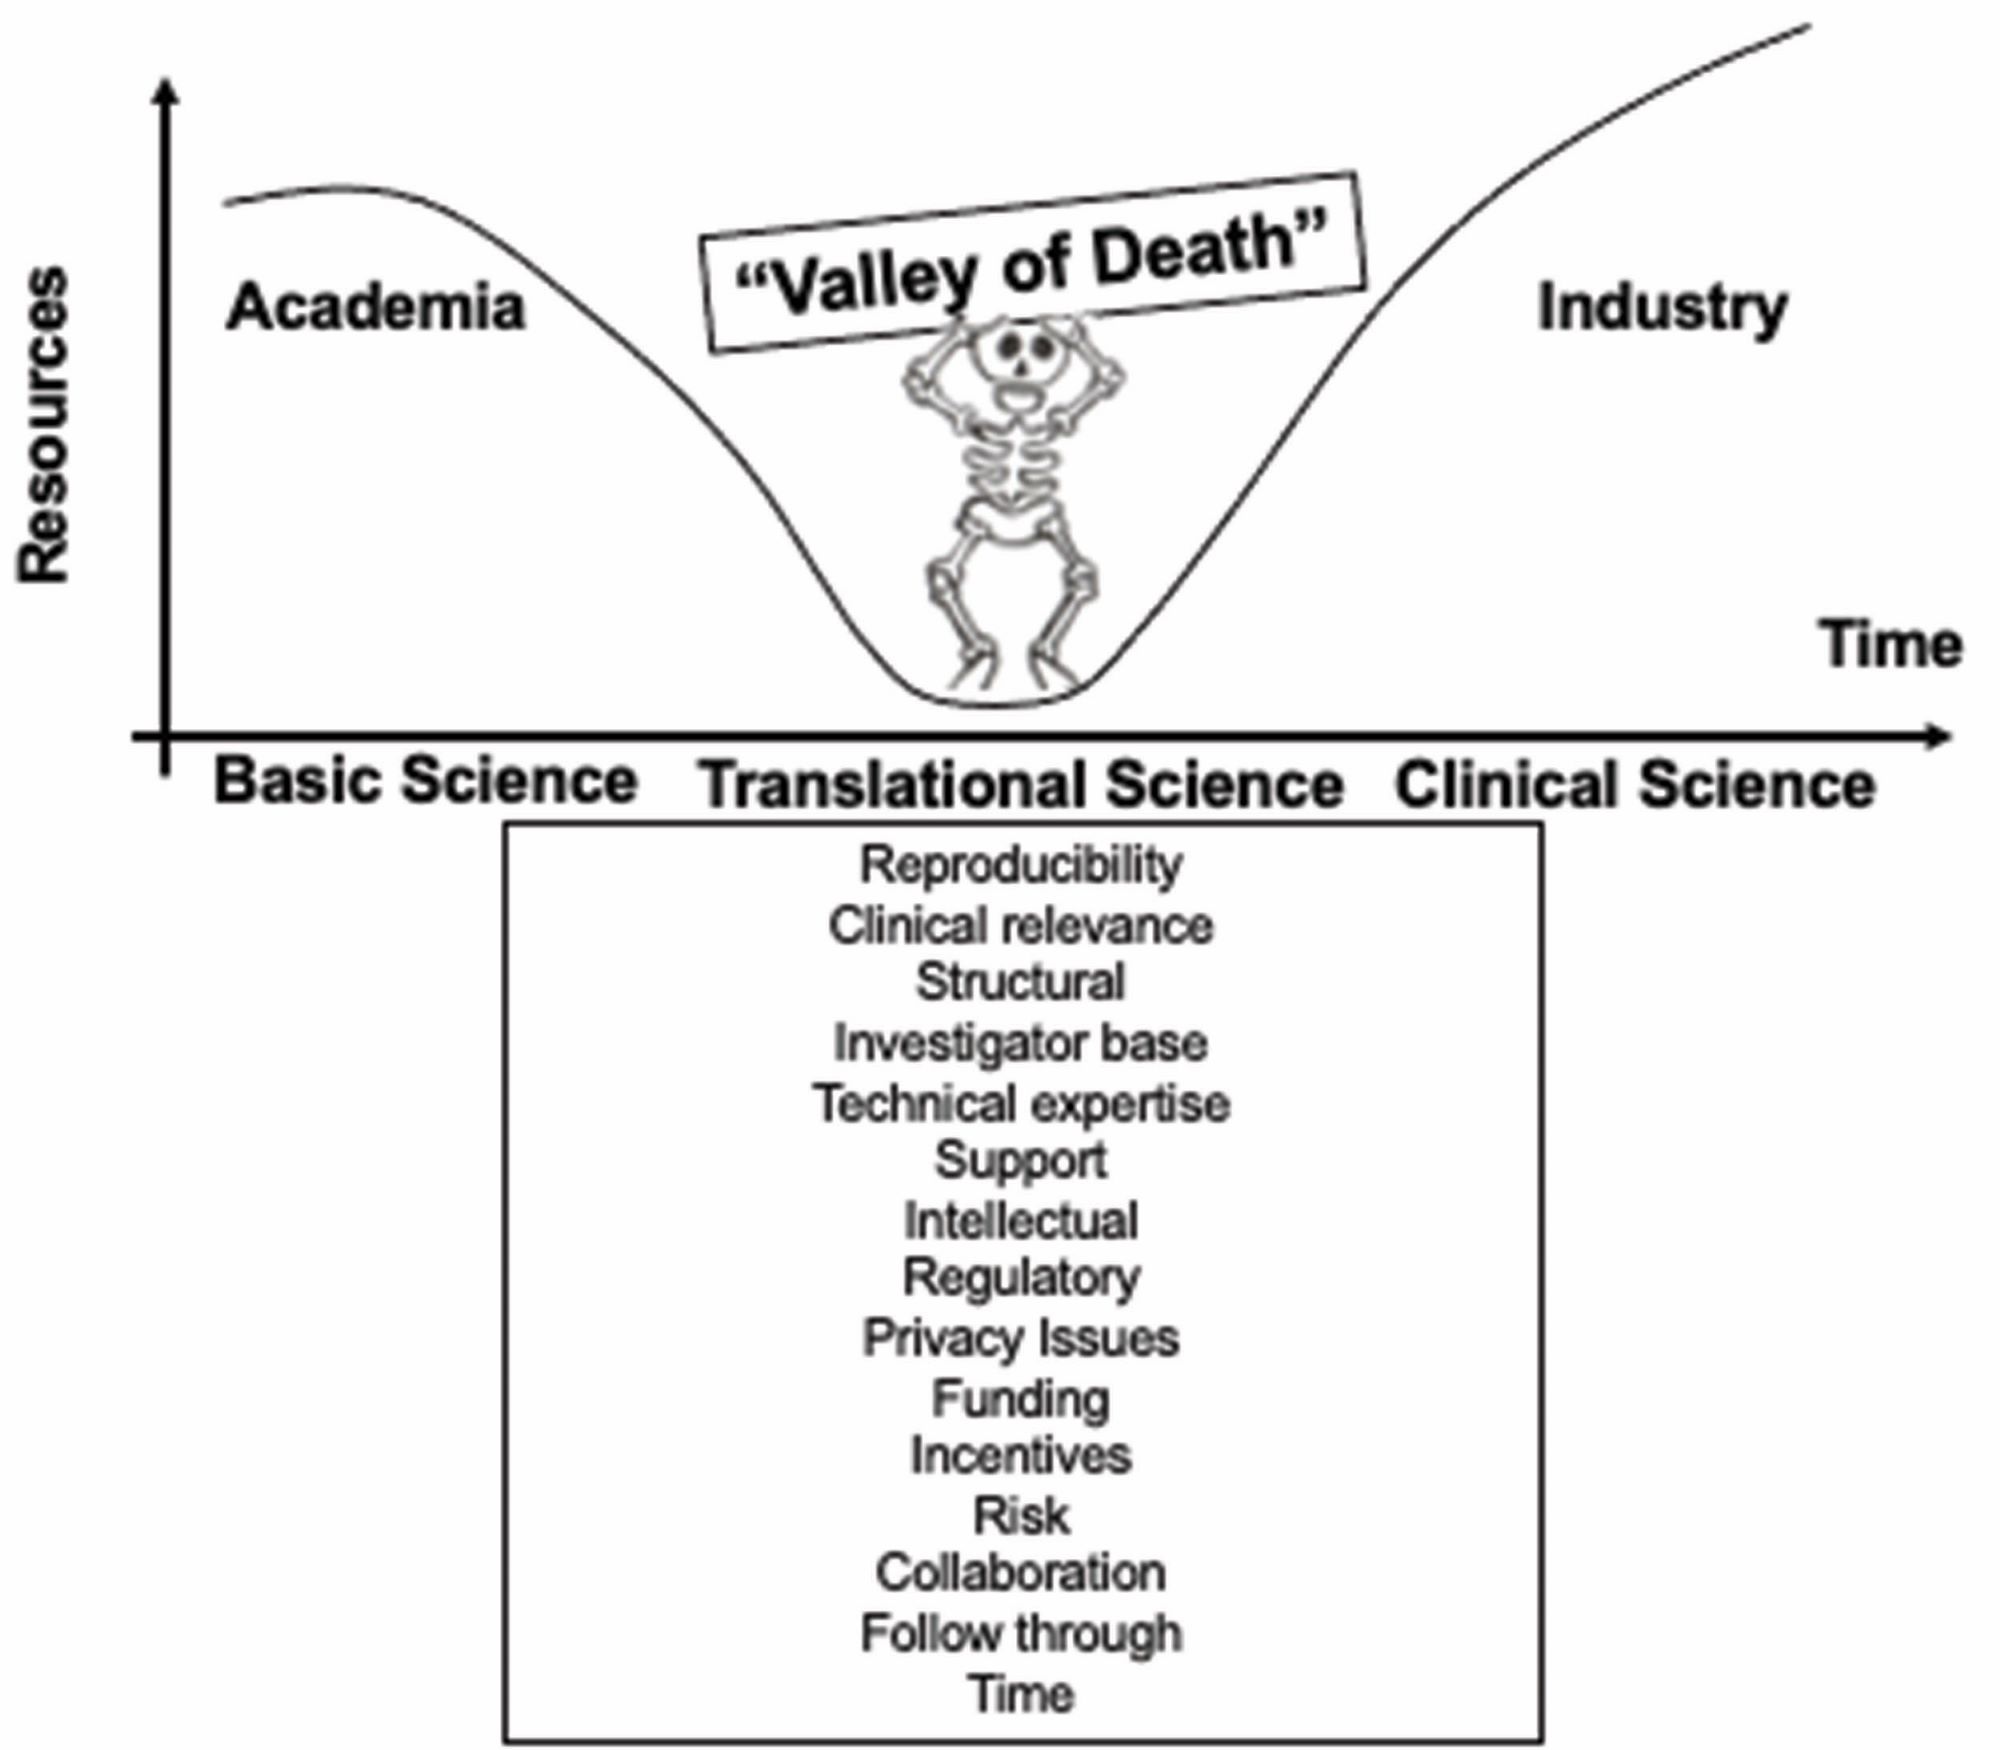 Figure adapted from: Seyhan, A.A. Lost in translation: the valley of death across preclinical and clinical divide – identification of problems and overcoming obstacles. transl med commun 4, 18 (2019). https://doi.org/10.1186/s41231-019-0050-7